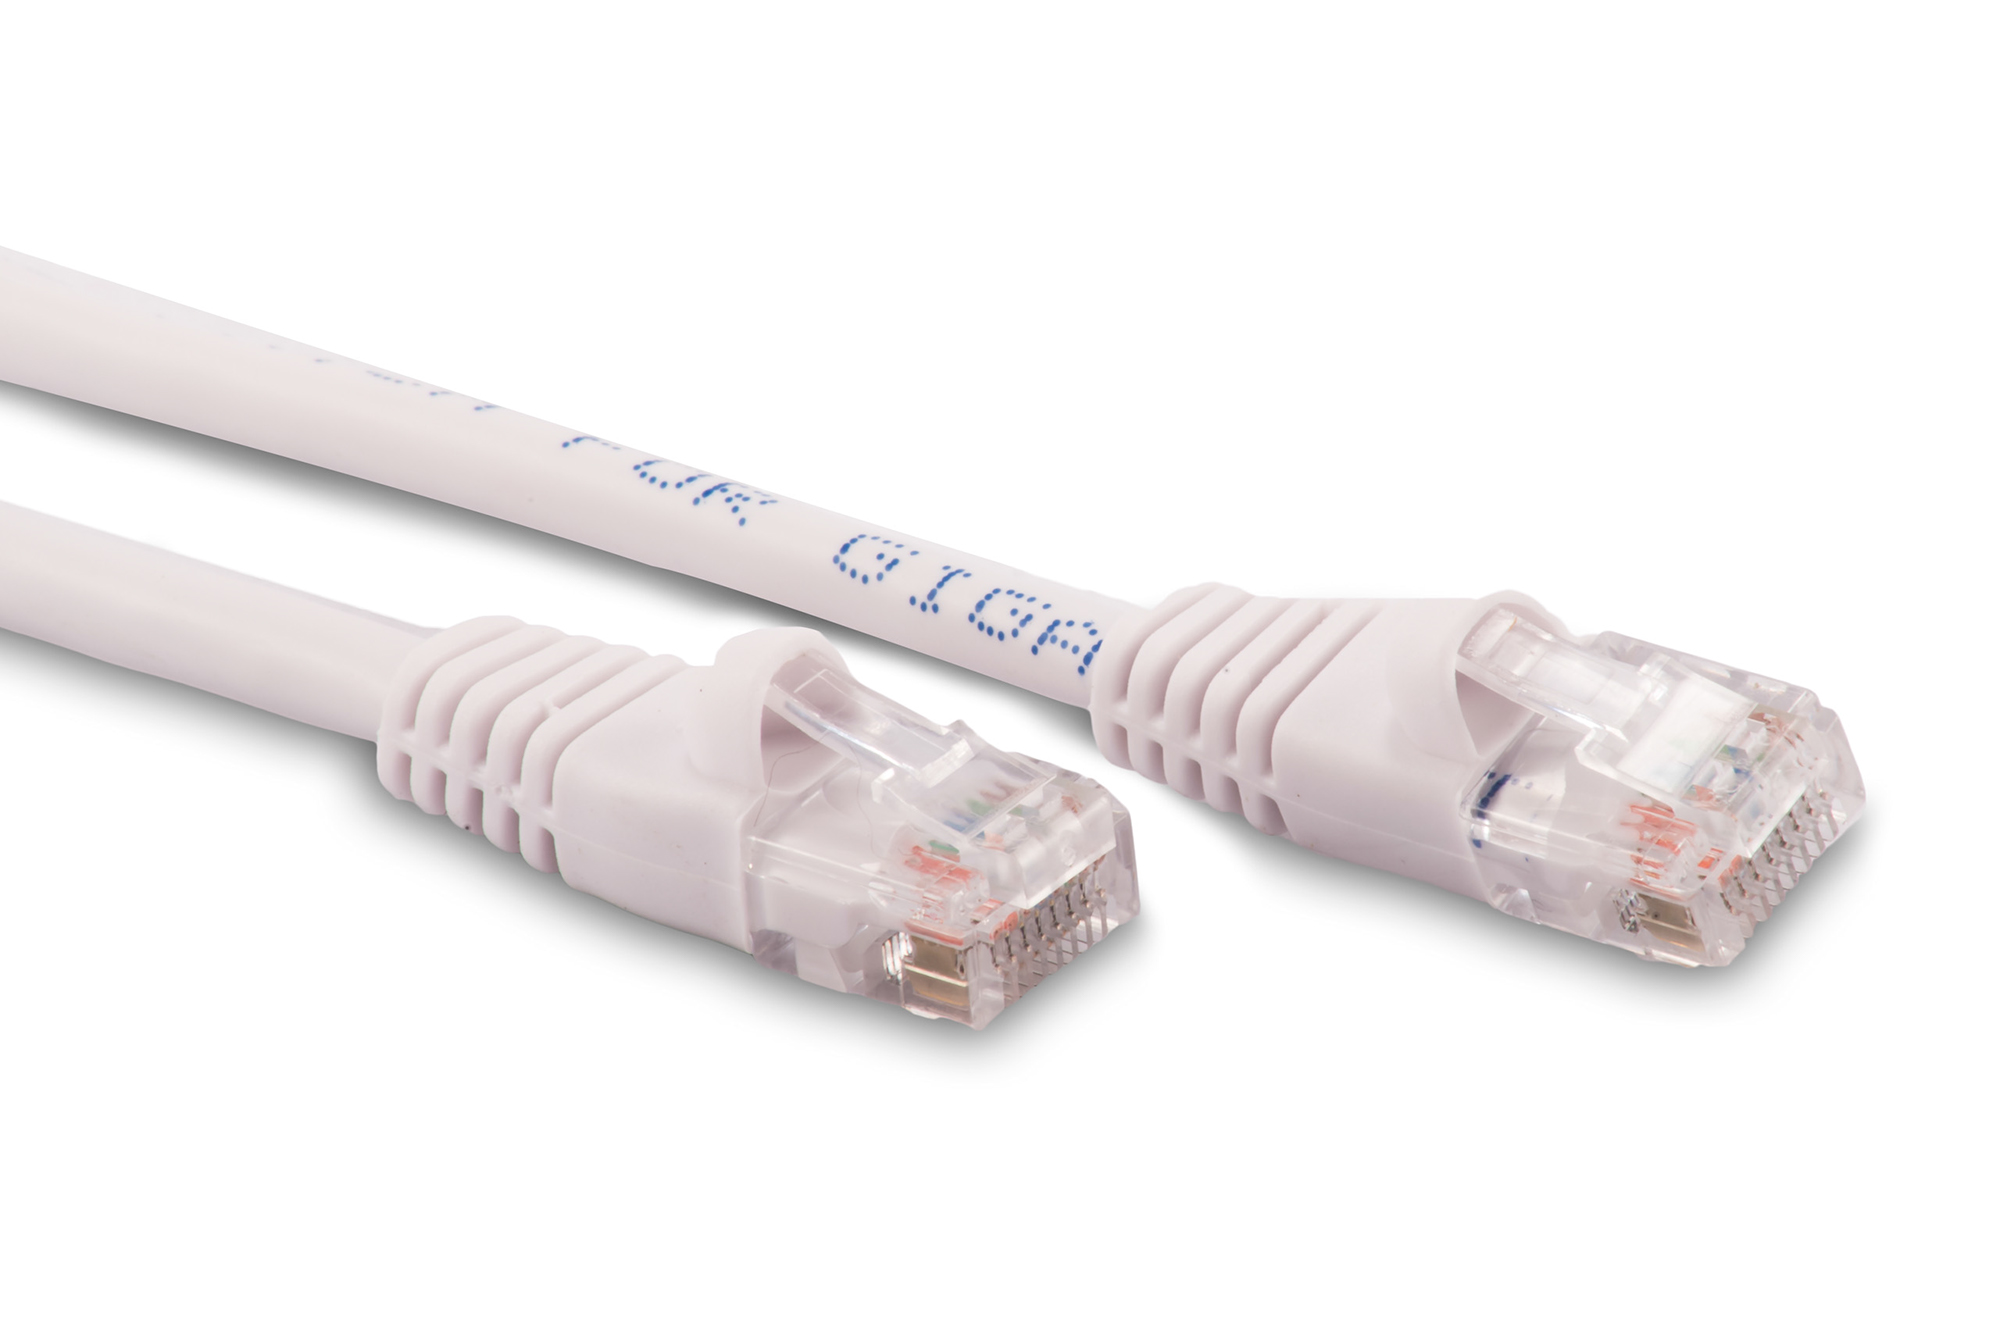 100ft Cat5e Ethernet Patch Cable - White Color - Snagless Boot, Stranded, RJ45, 350Mhz, 24AWG